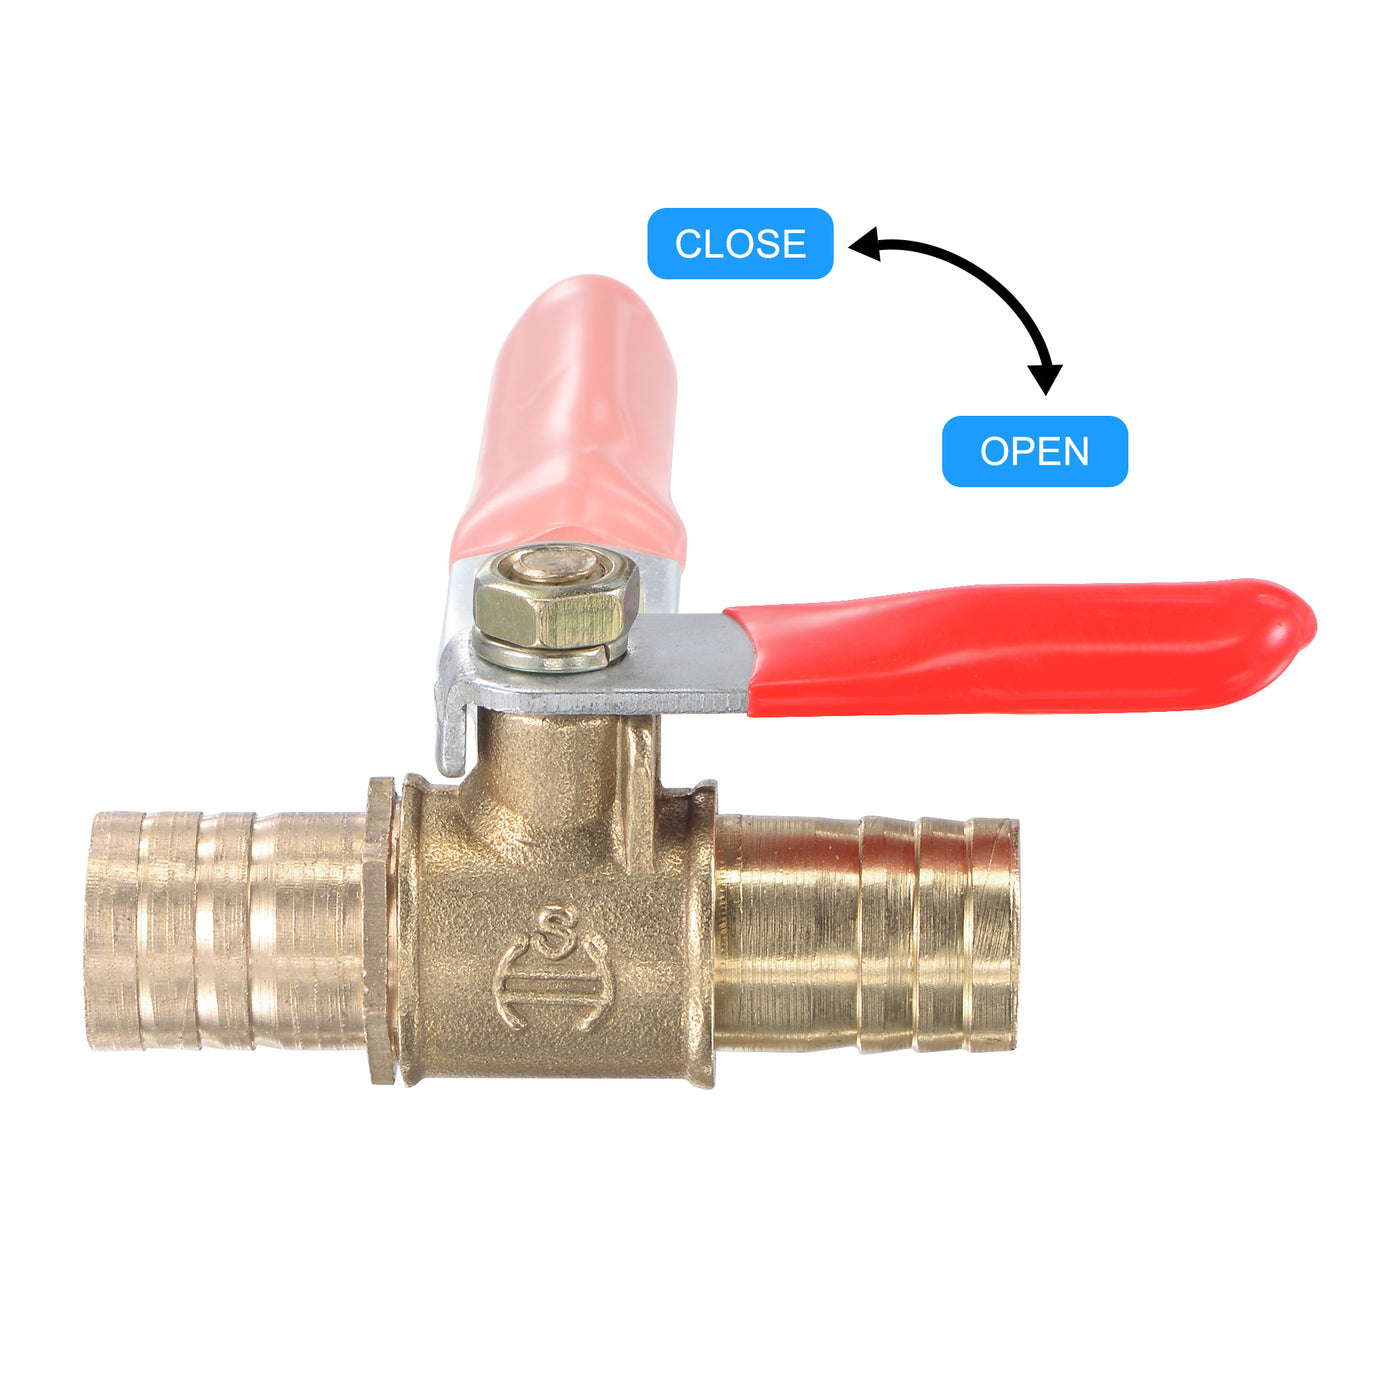 Uxcell Uxcell Brass Air Ball Valve Shut Off Switch 12mm Hose Barb to 12mm Hose Barb with Clamps Red Handle 2Pcs